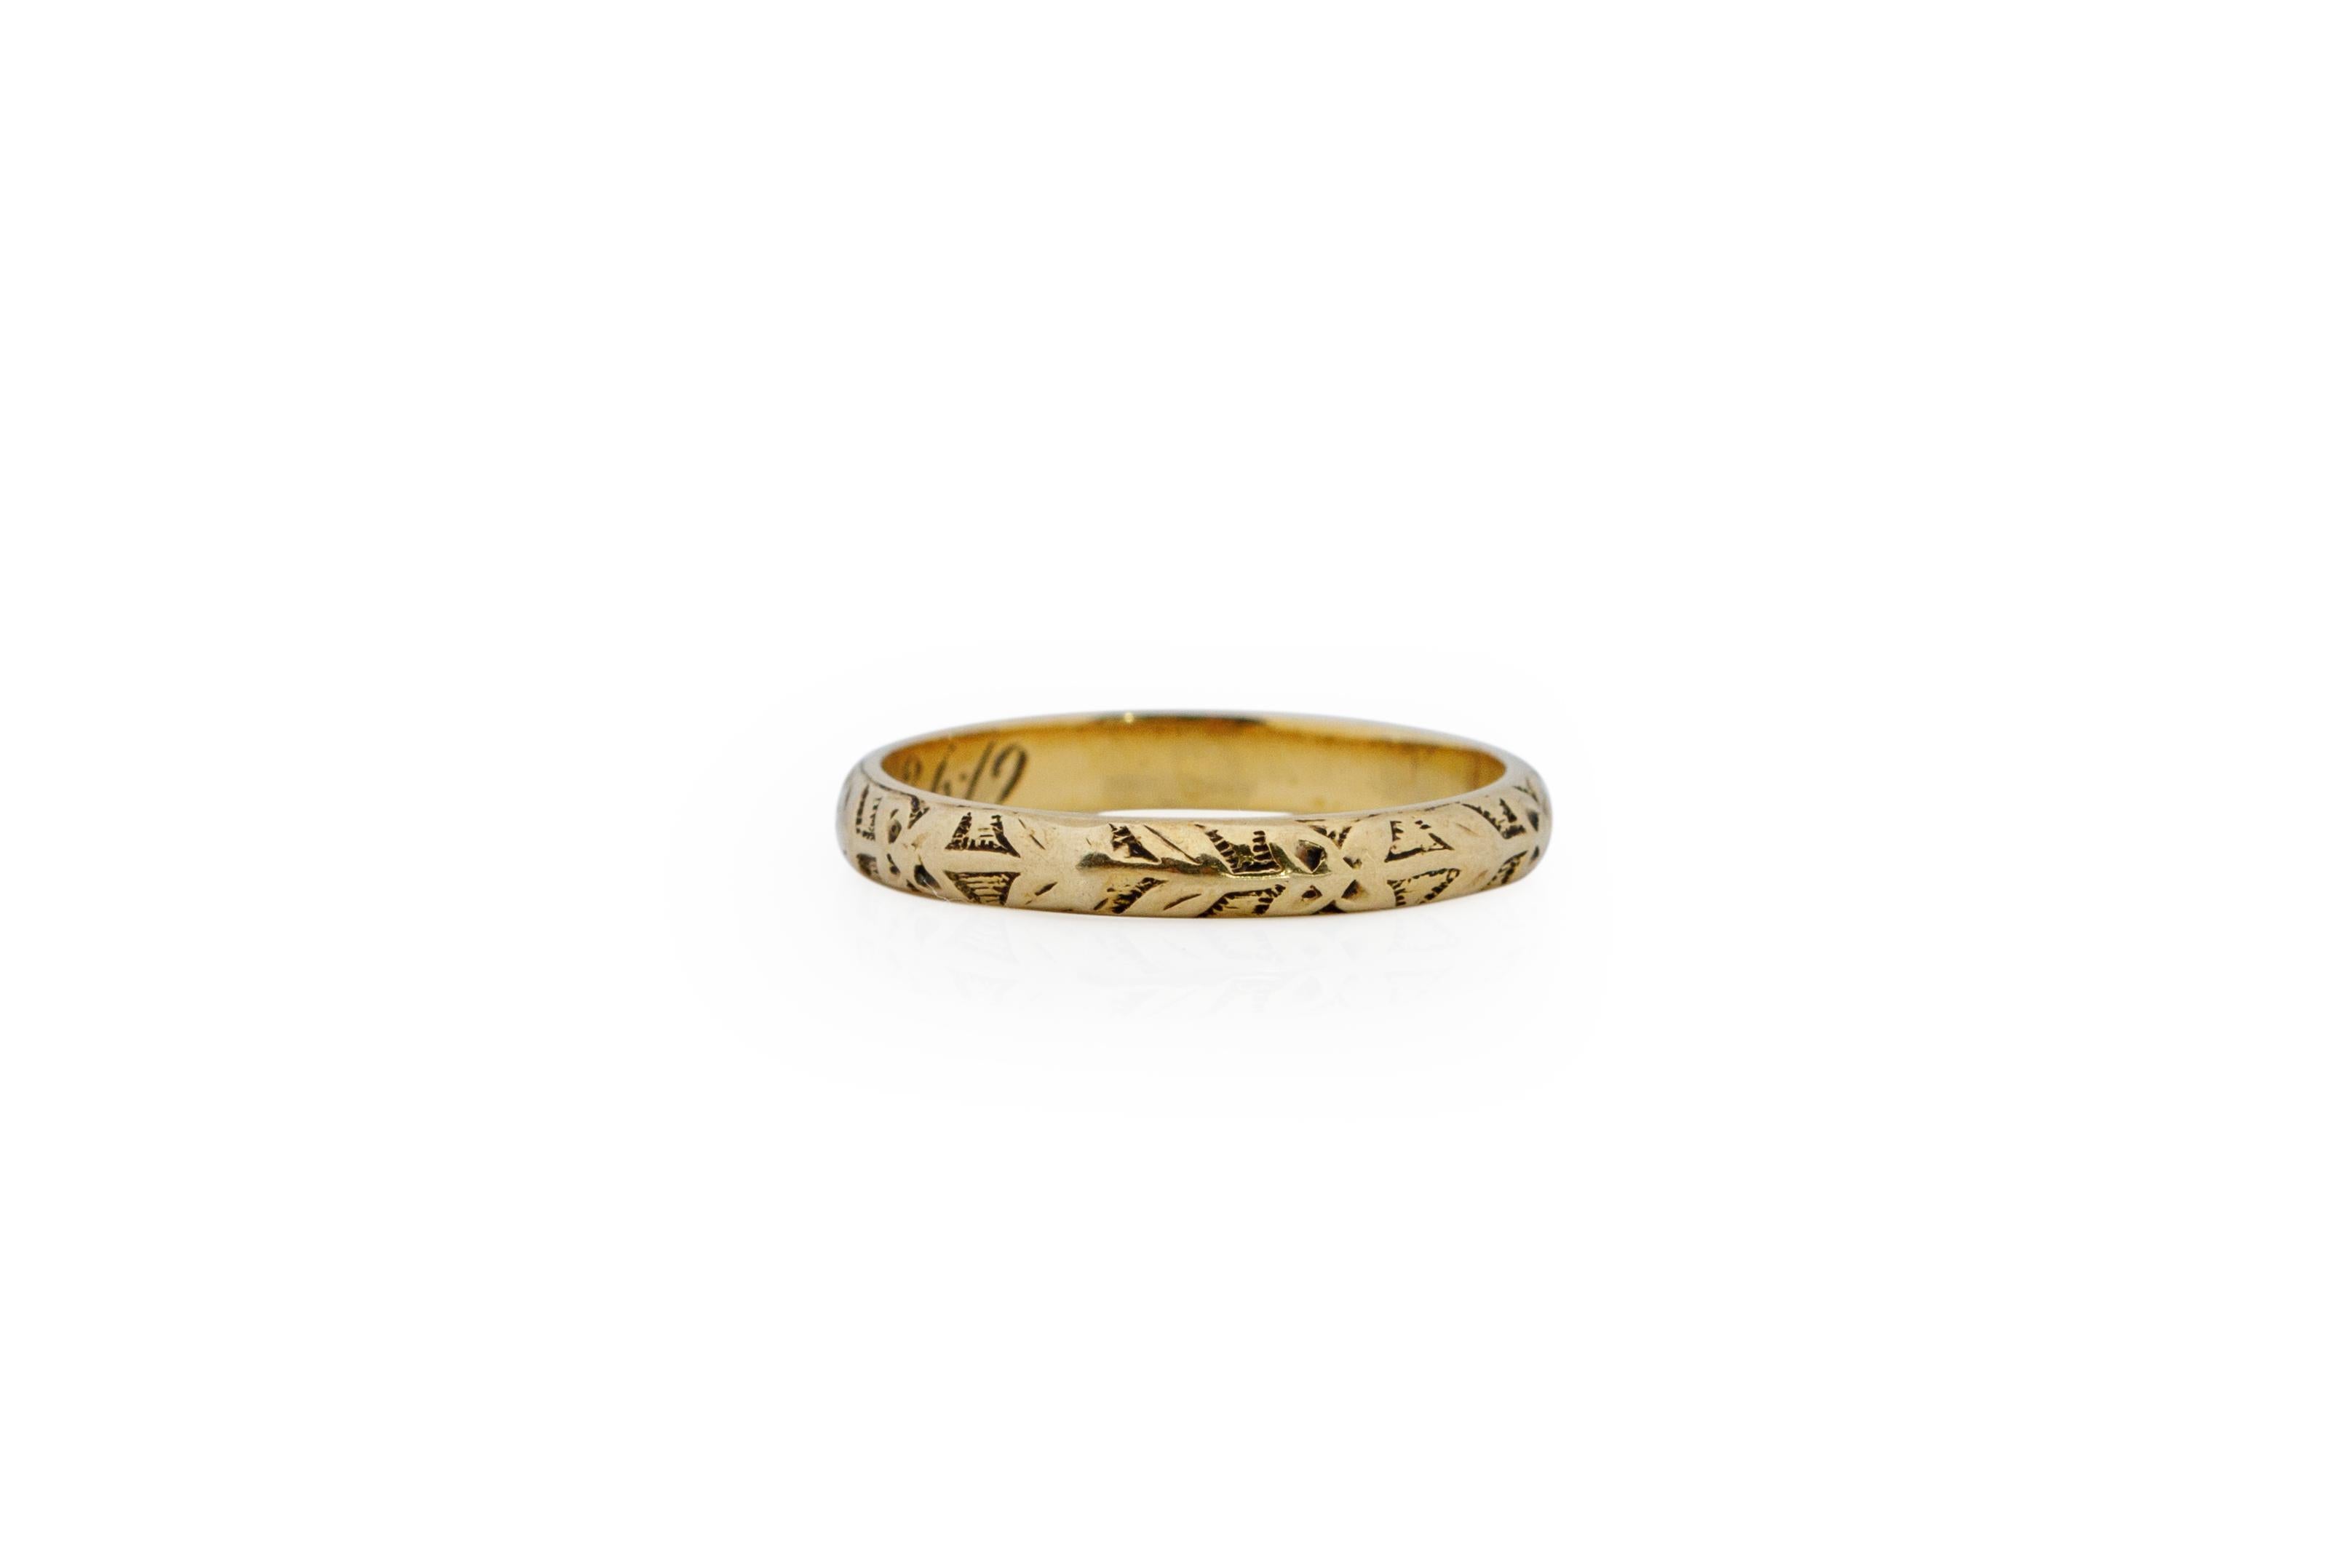 Ring Size: 6.5
Metal Type: 14 Karat Yellow Gold [Hallmarked, and Tested]
Weight: 3.5 grams

Finger to Top of Stone Measurement: 2mm
Condition: Excellent